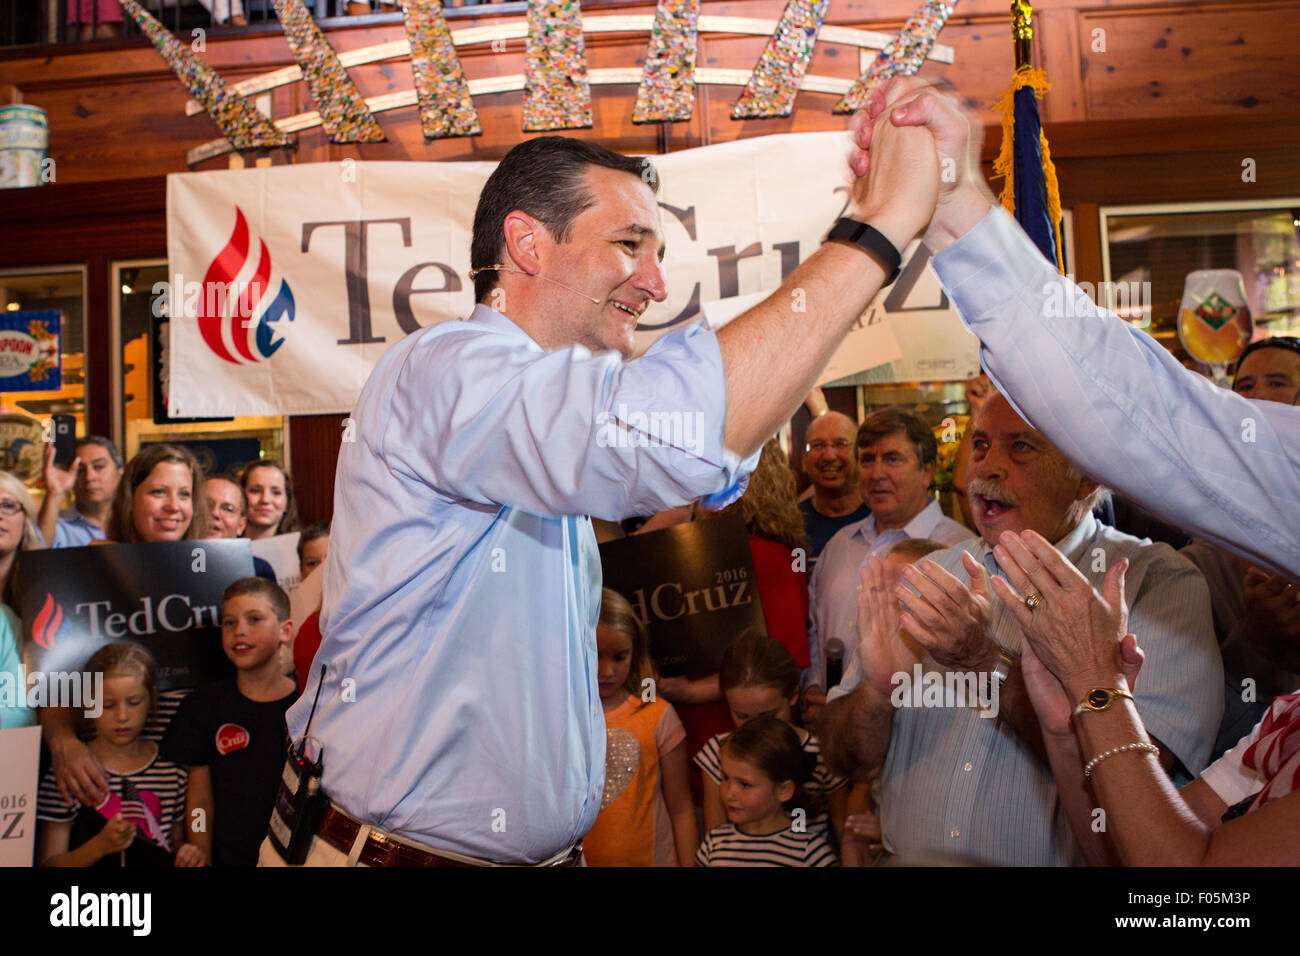 Mt Pleasant, South Carolina, USA. 7th Aug, 2015. U.S. Senator and GOP presidential candidate Ted Cruz high fives a supporter during a campaign stop at the Liberty Tap Room restaurant August 7, 2015 in Mt Pleasant, South Carolina. The event was the kick off for a seven-day bus tour called the Cruz Country Bus Tour of southern states. Credit:  Planetpix/Alamy Live News Stock Photo